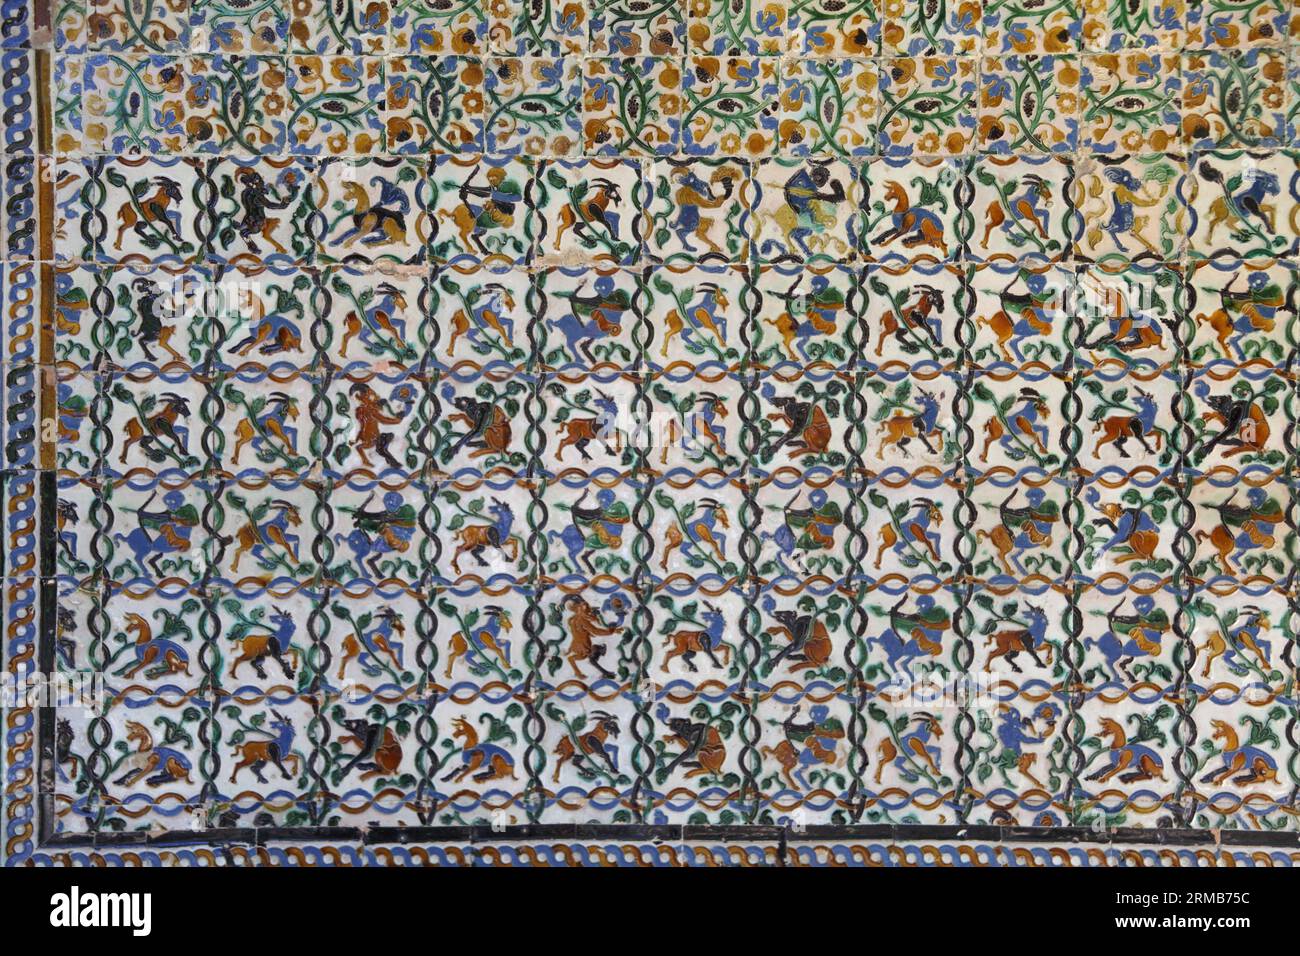 14th century Moorish tiled wall in Royal Alcazar palace gardens showing images of mythical creatures, Seville, Andalusia, Spain Stock Photo